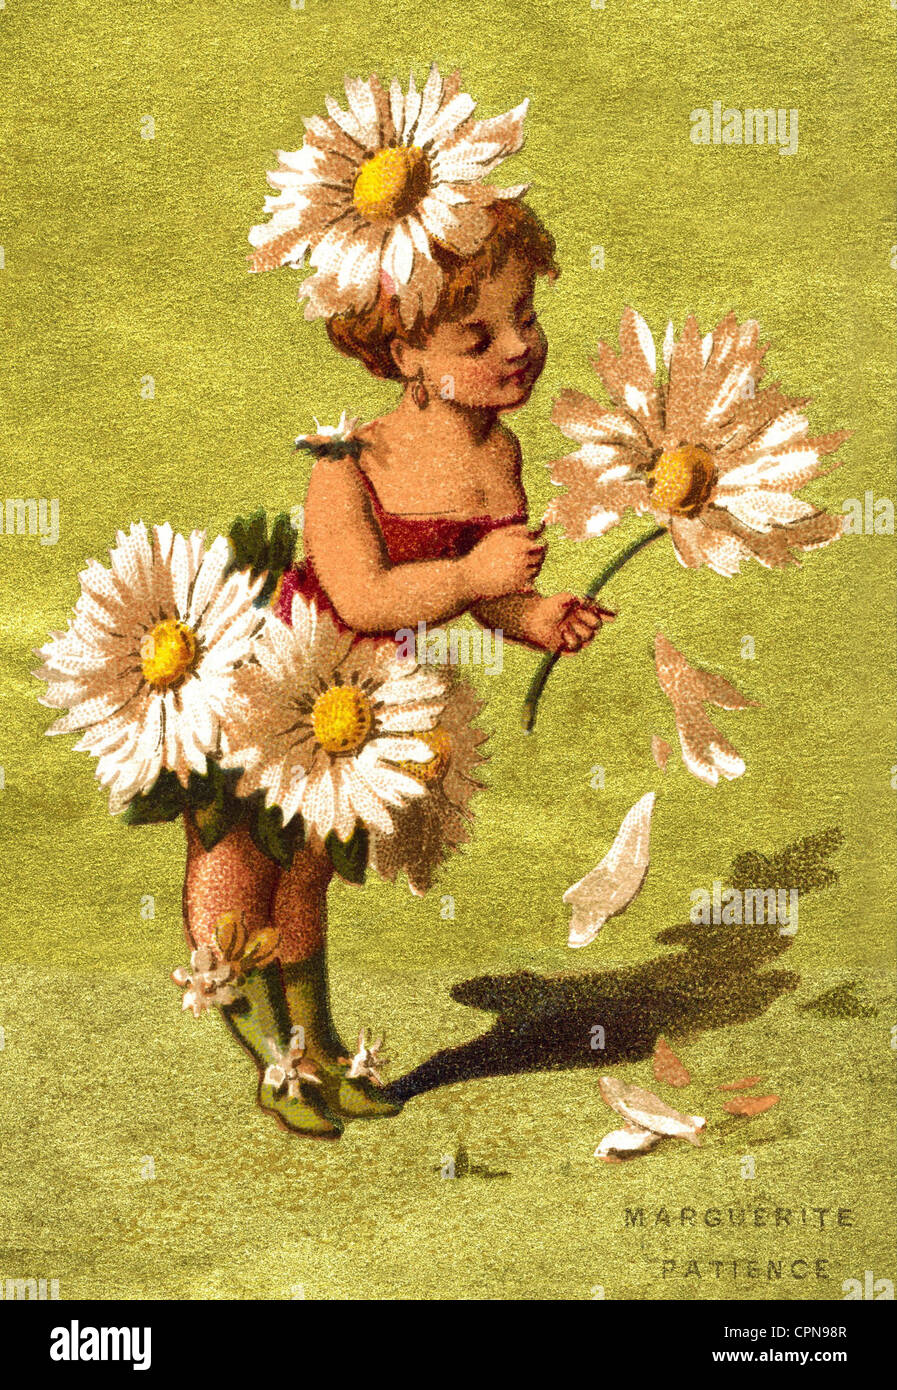 allegories, little girl in the guise of a flower, hair and skirt decorated with marguerites, counting rhyme: he loves me, he loves me not, France, circa 1895, Additional-Rights-Clearences-Not Available Stock Photo